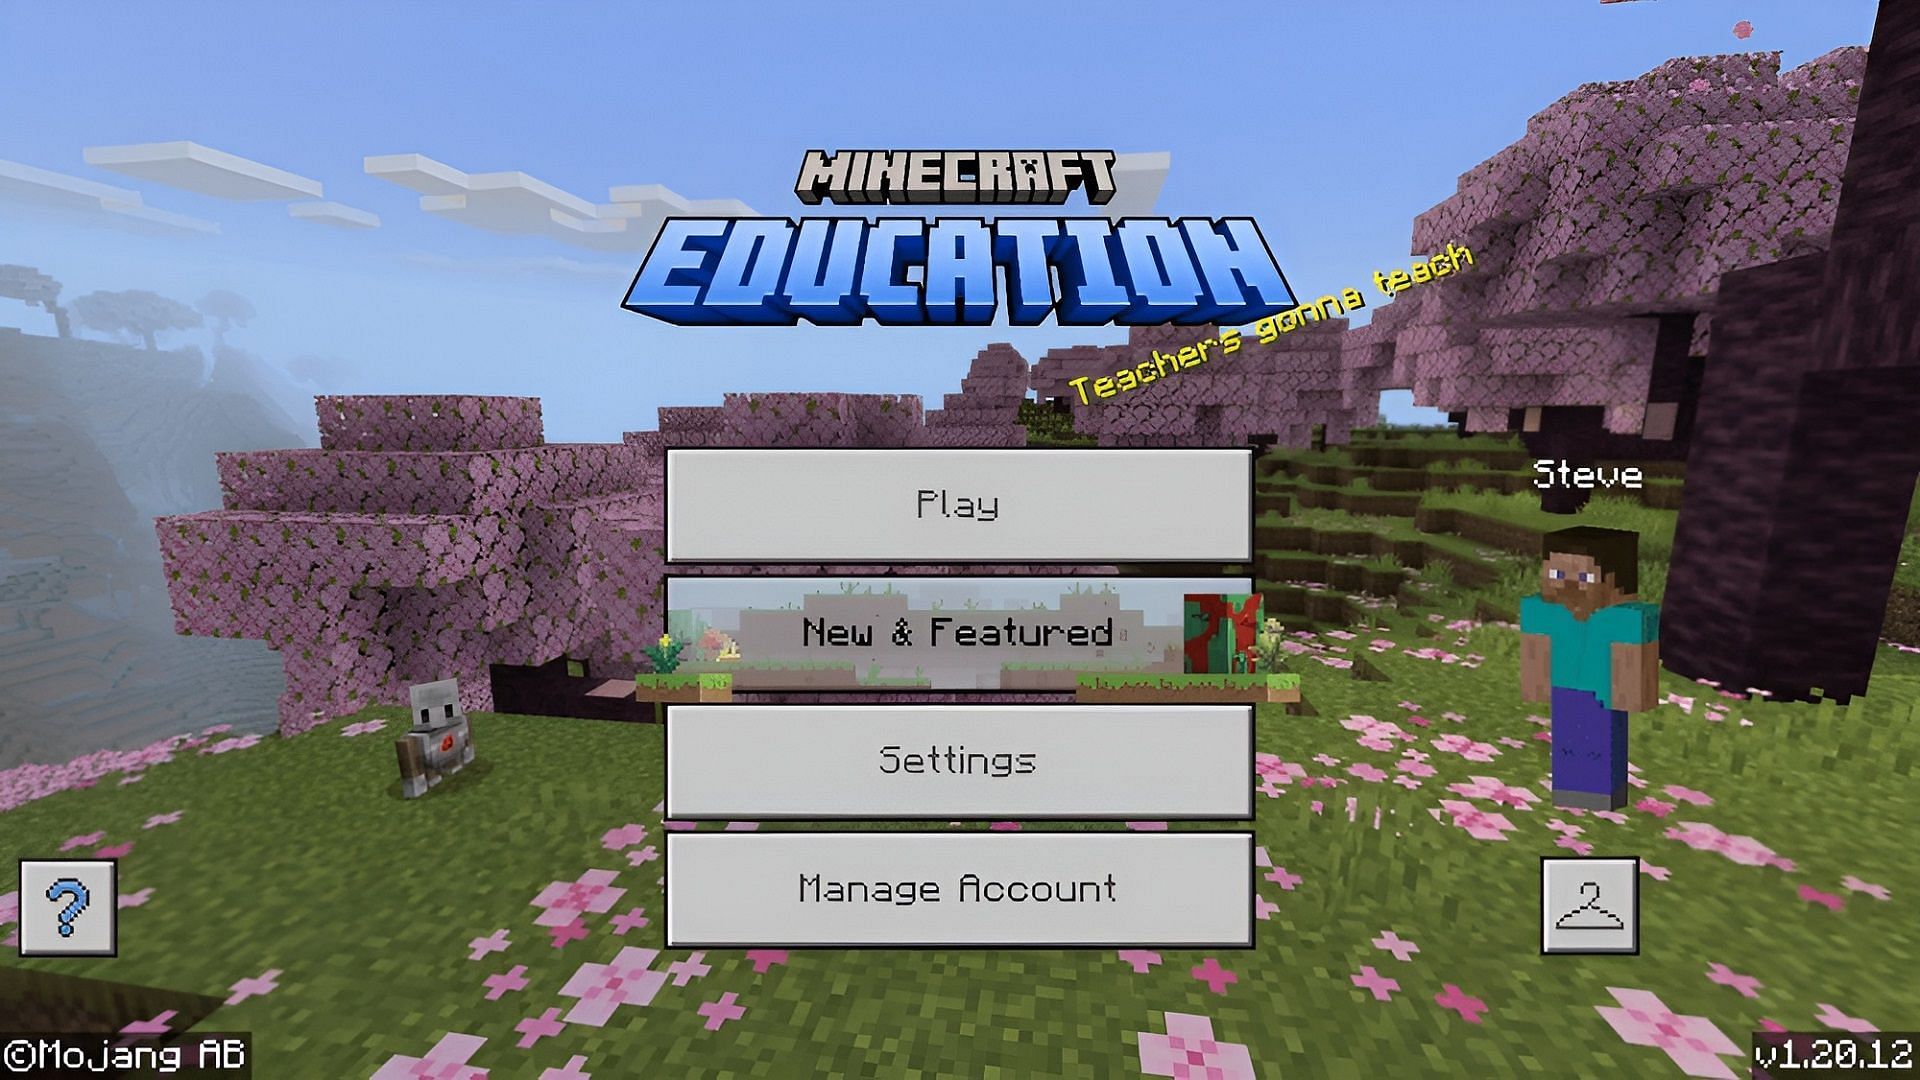 How different is Minecraft Education Edition from Java and Bedrock?